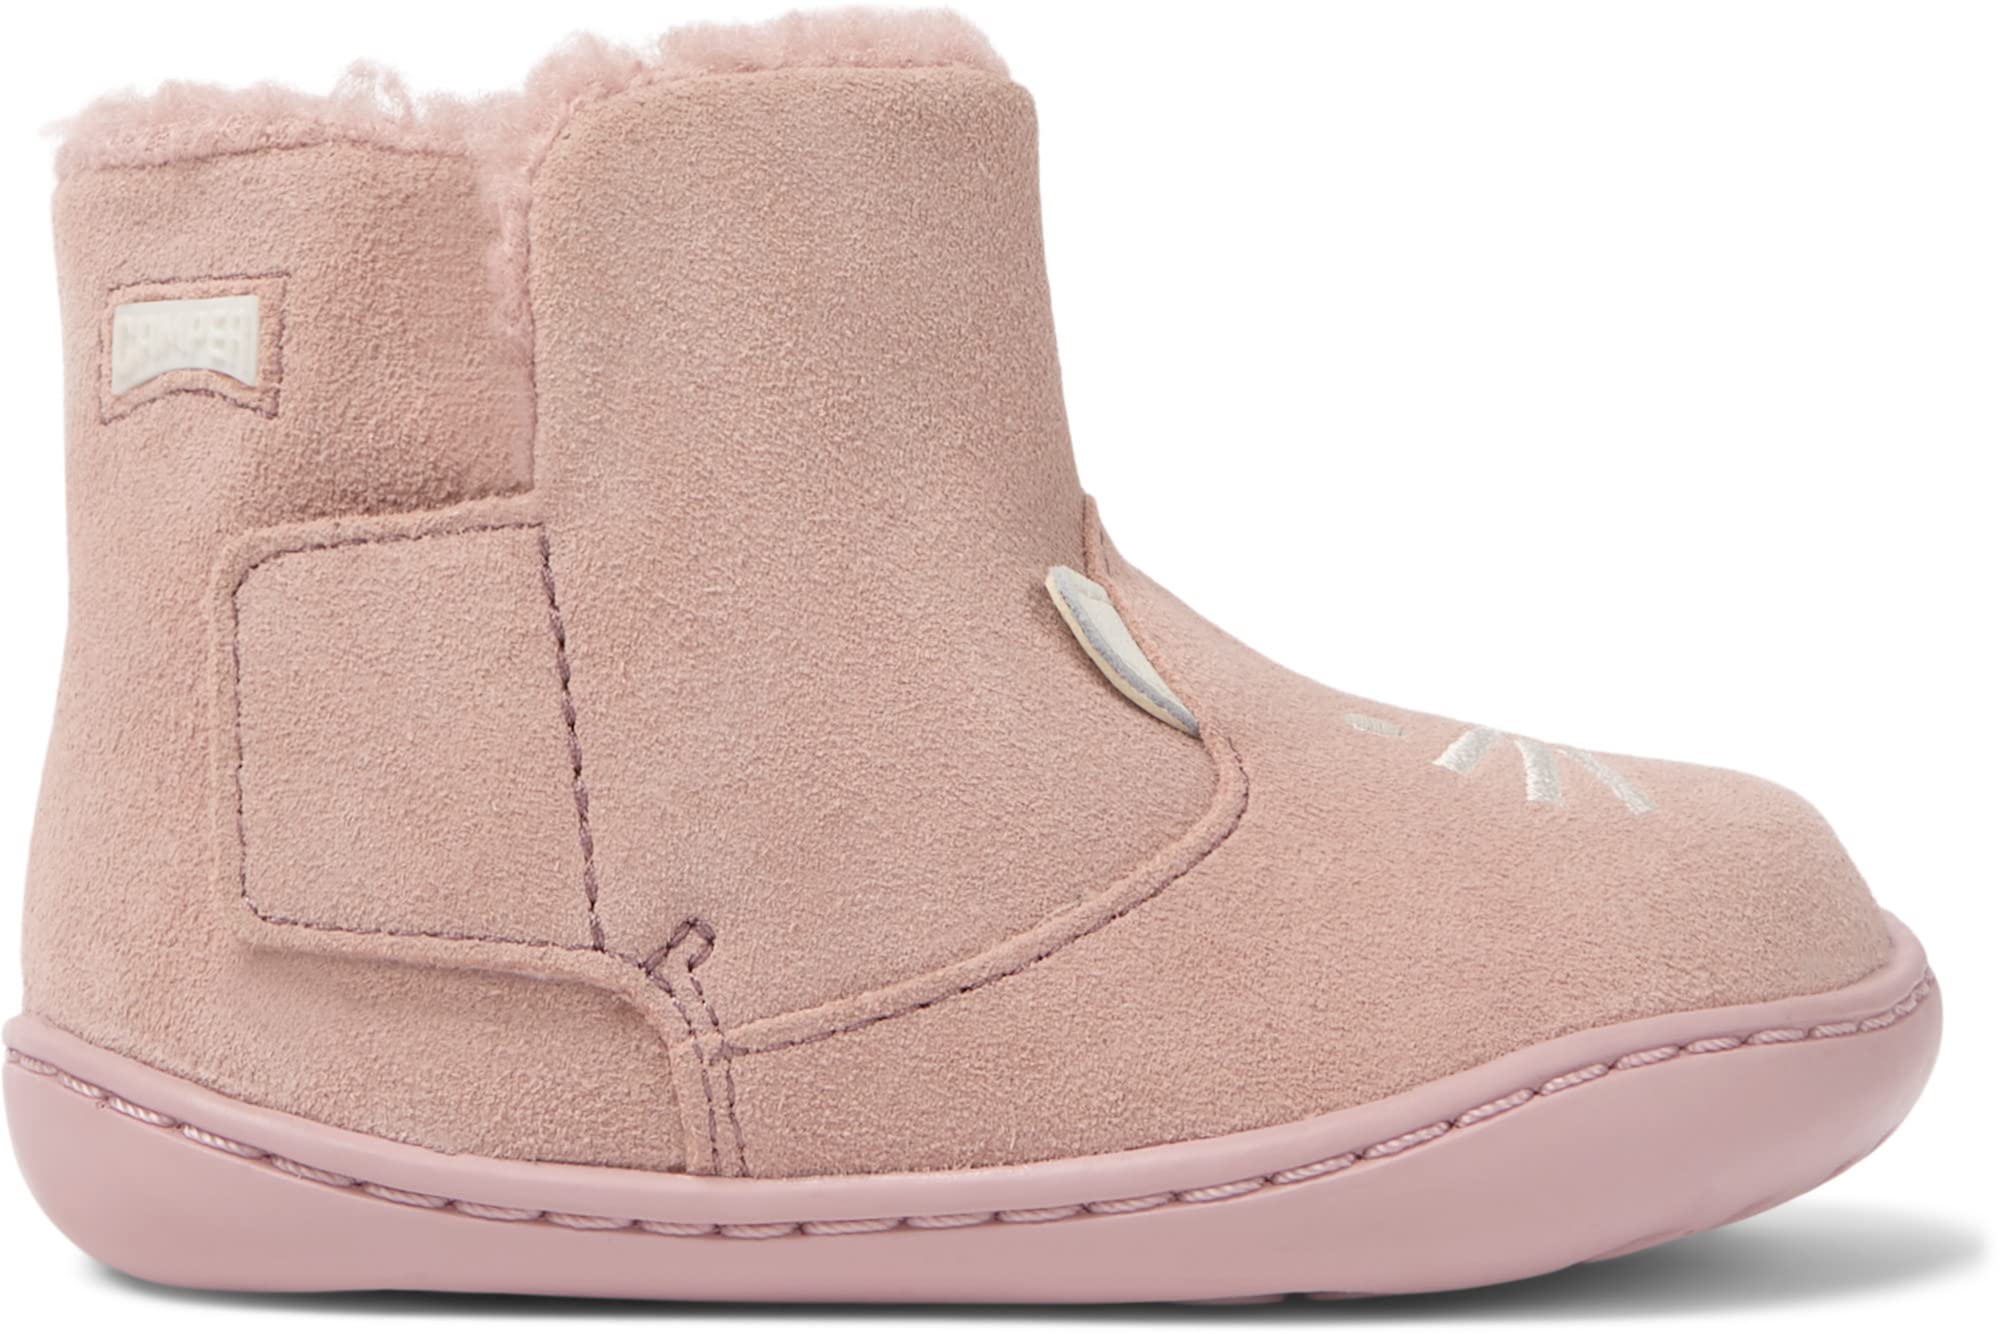 Camper Unisex-Child Peu Cami Fw Ankle Boot